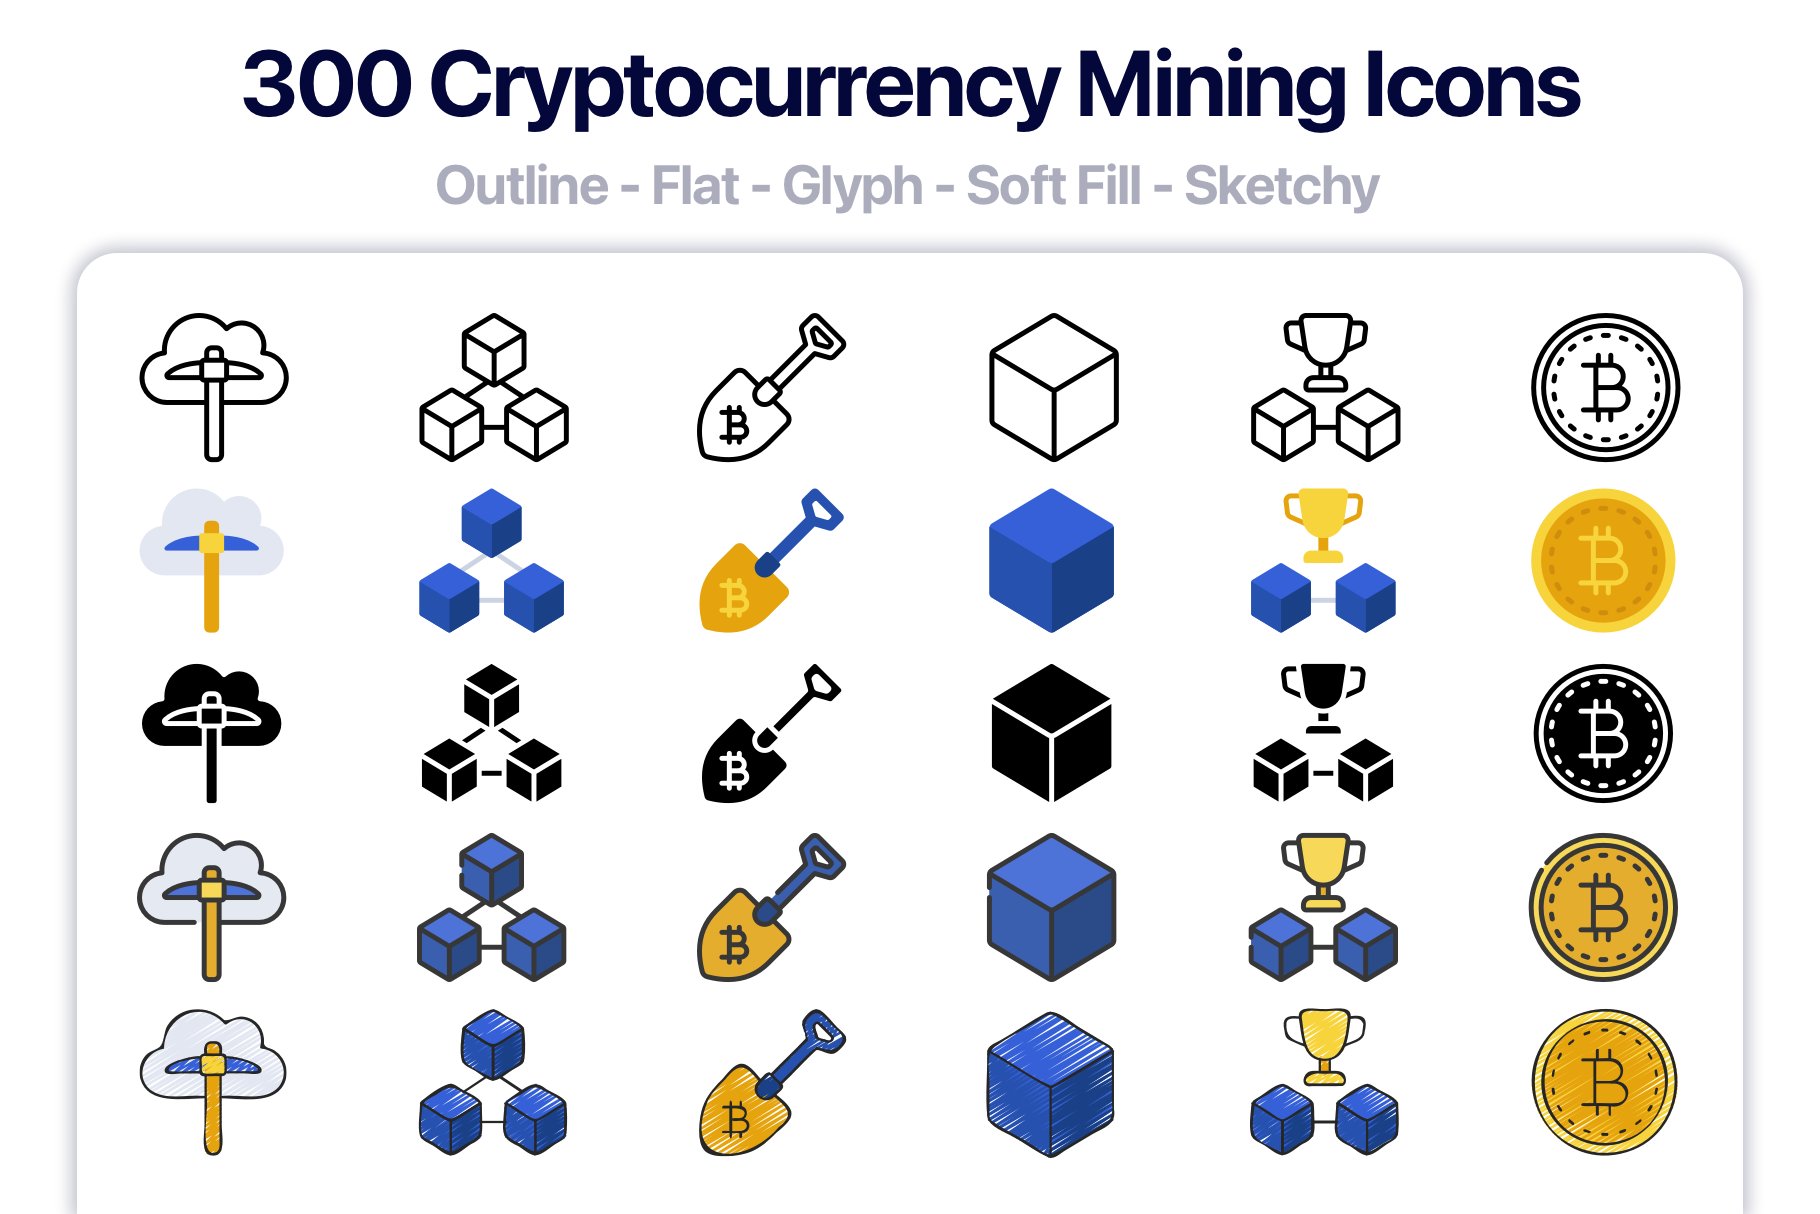 300 cryptocurrency mining icons.